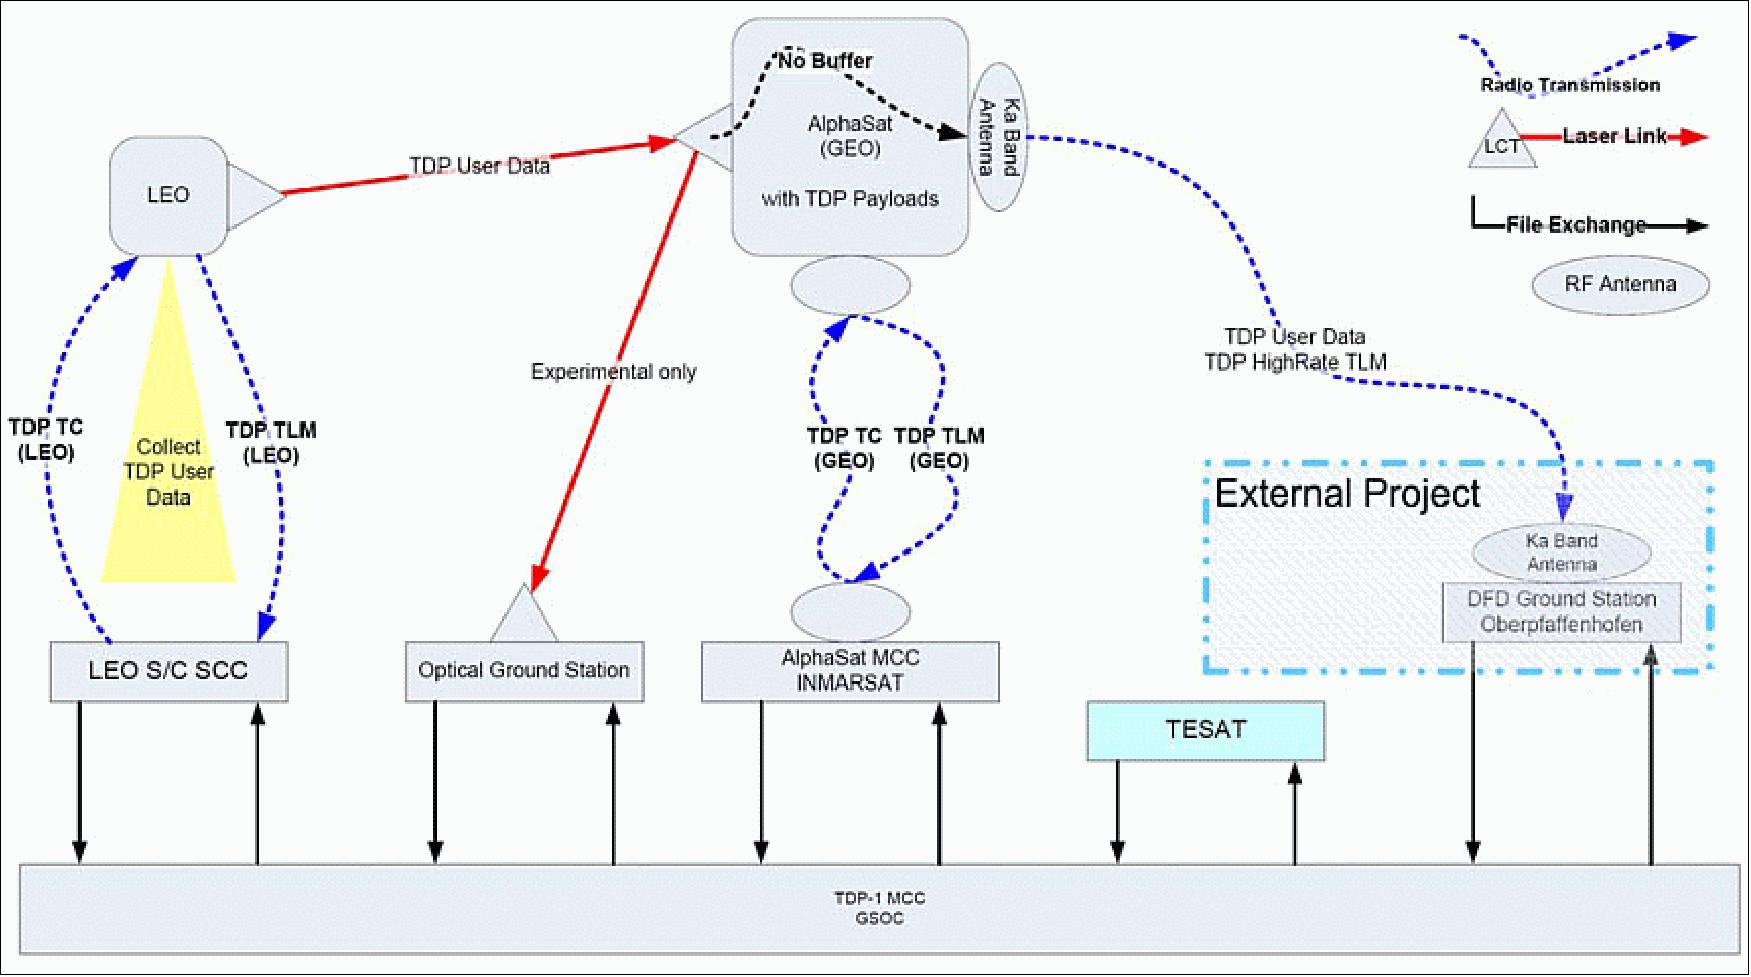 Figure 55: Overview of elements in the TDP1 project (image credit: DLR/GSOC)